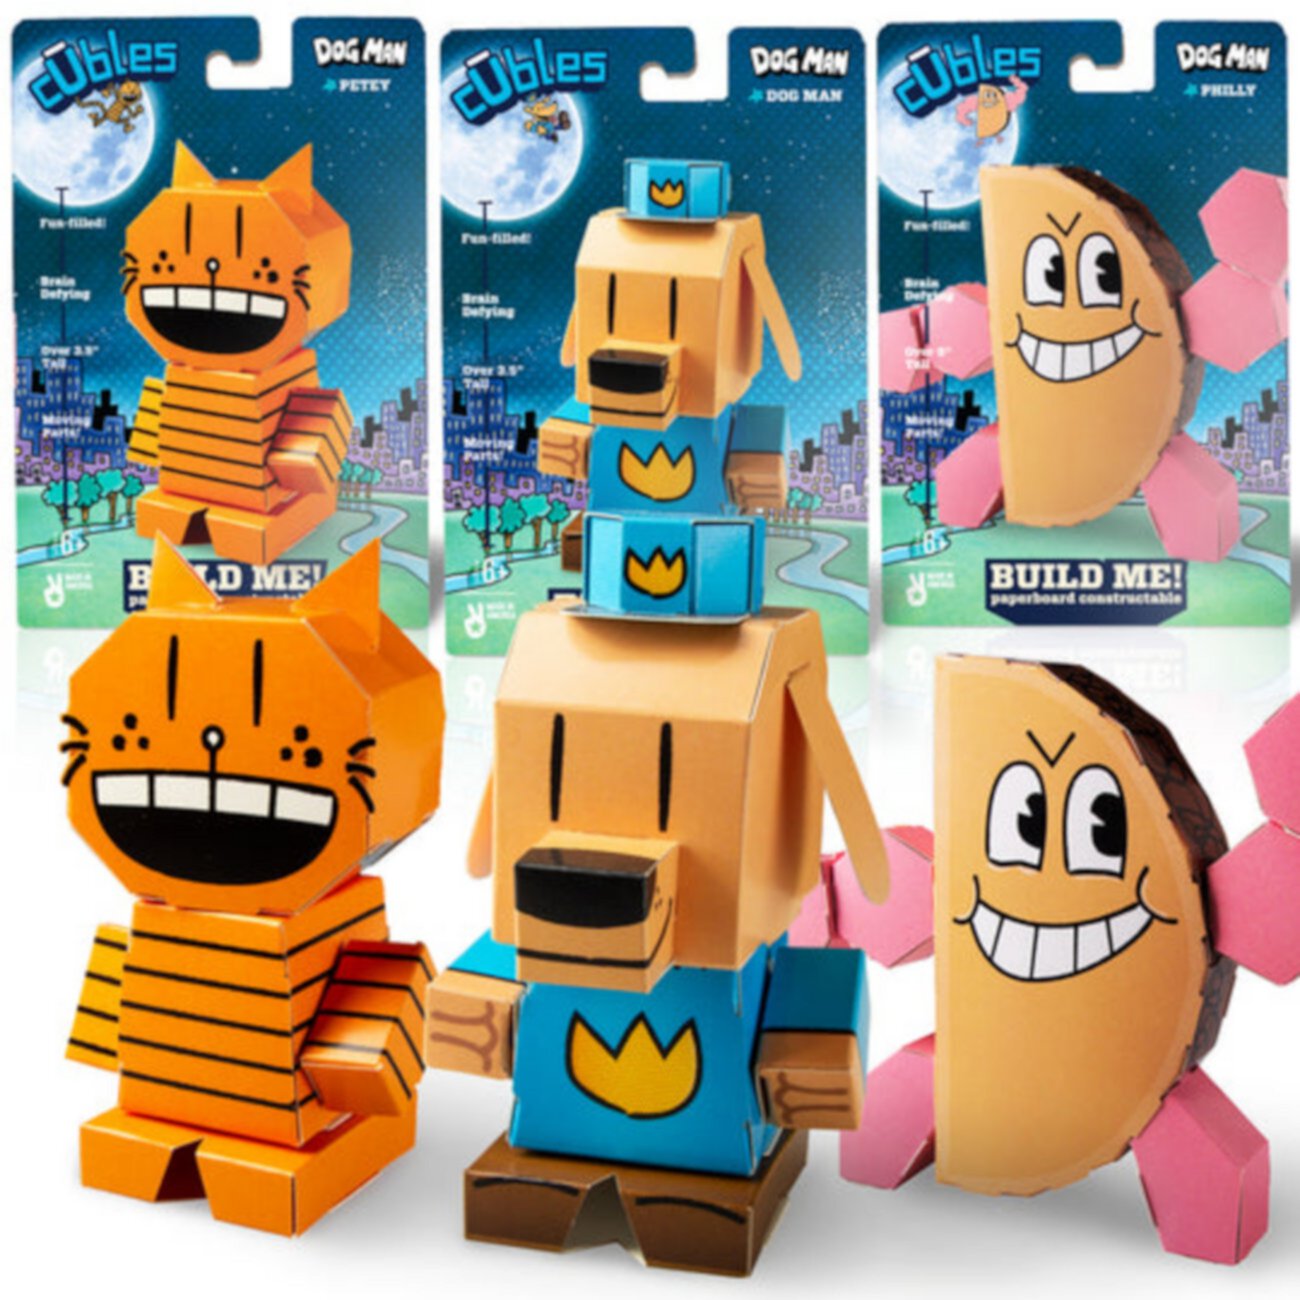 Dog Man and Friends Featuring Dog Man, Petey, Philly - Buildable Toys Cubles